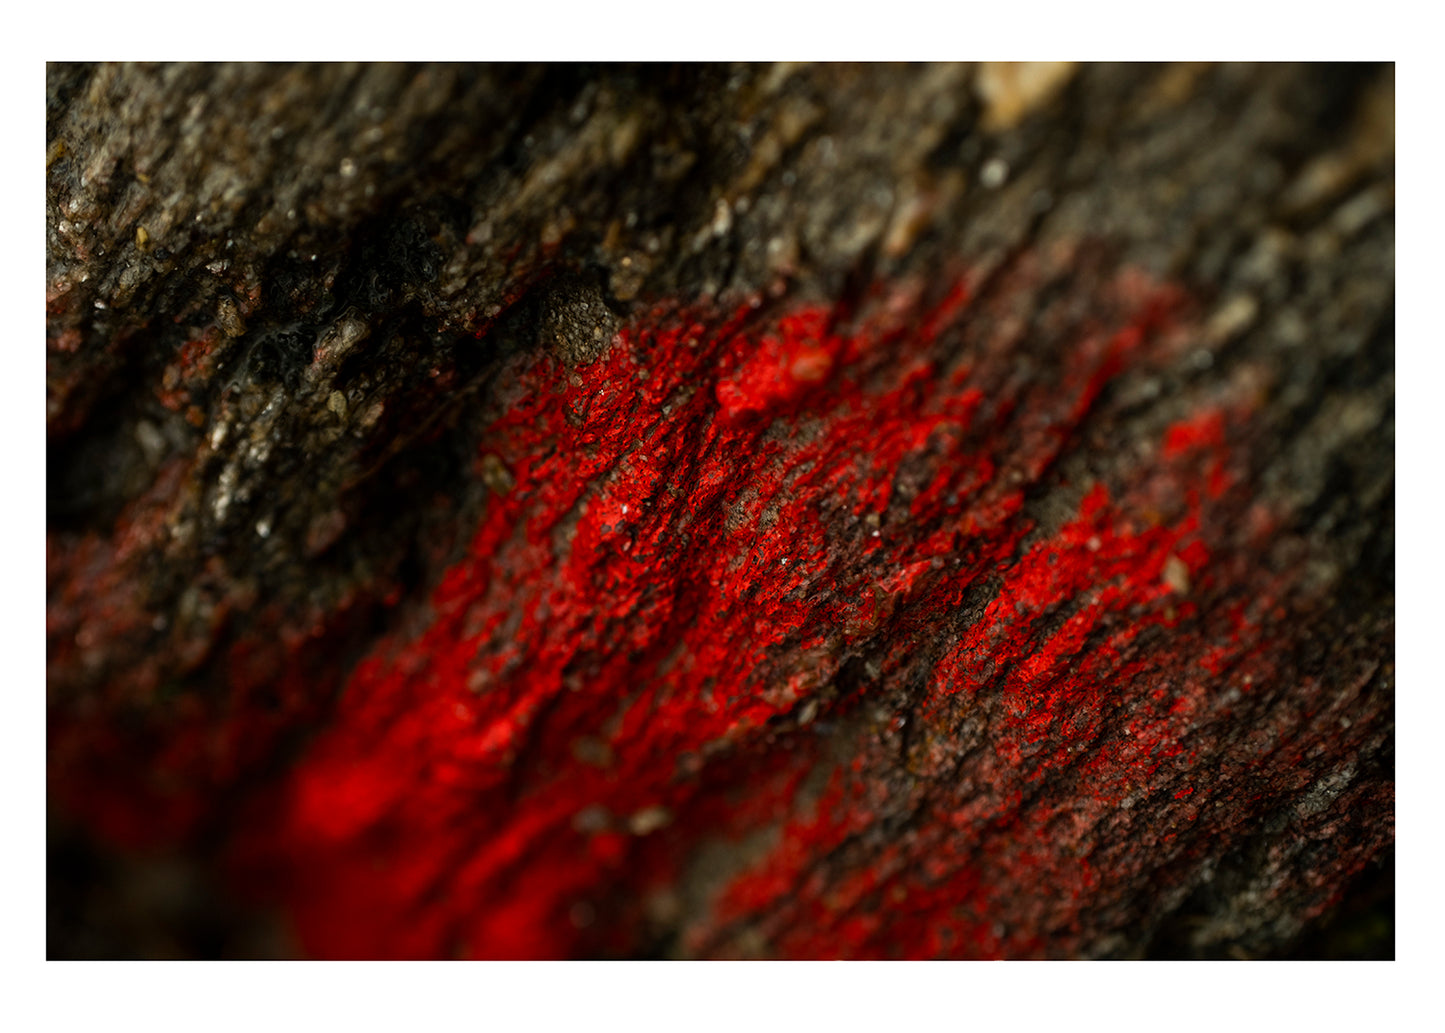 Marked Rock - limited Red Series - photography